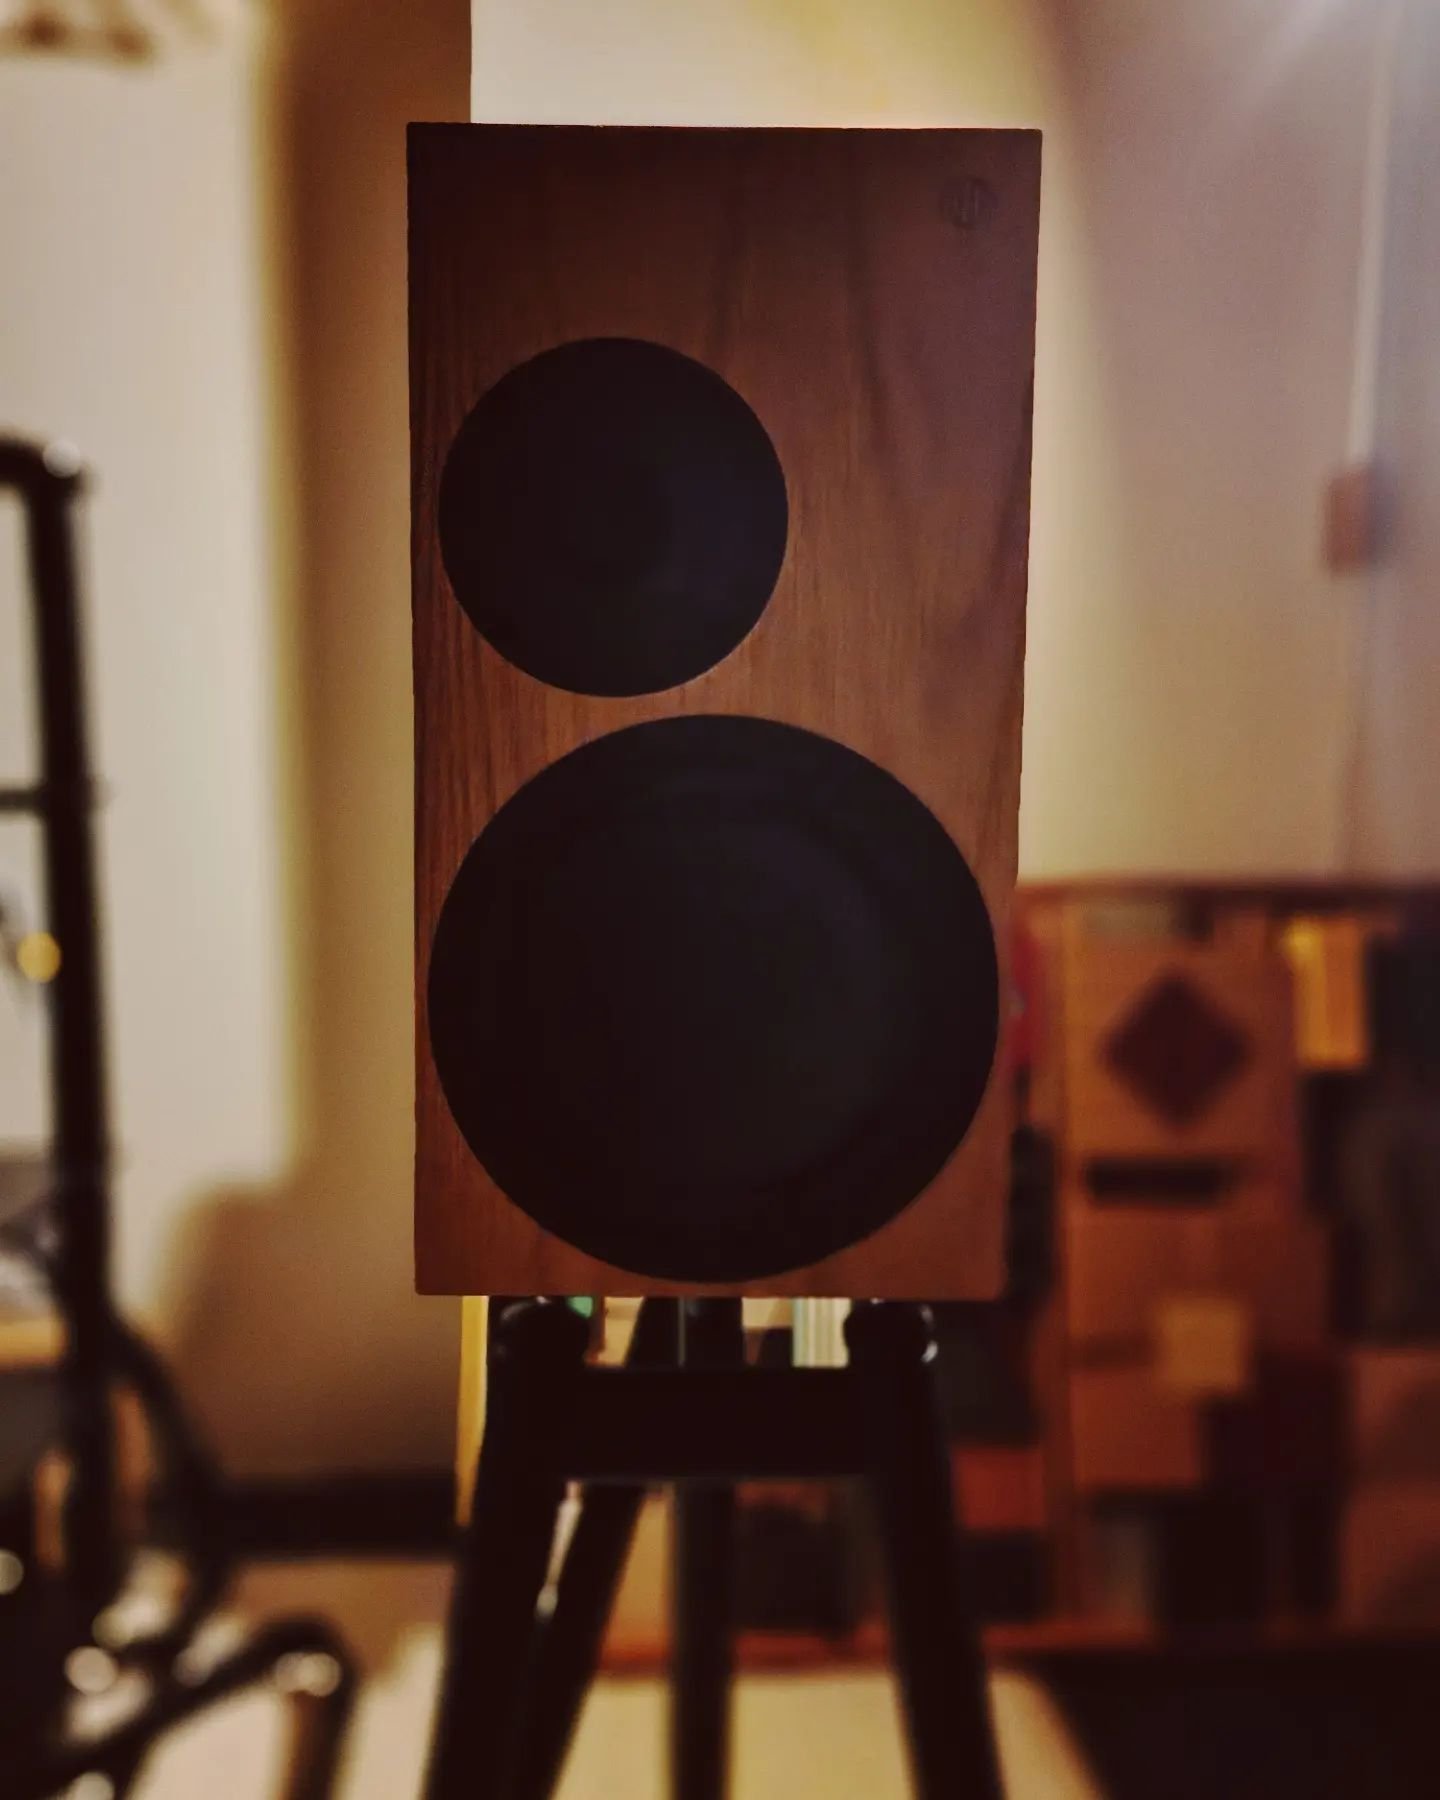 Perhaps you're thinking &quot;I'm sure it's good but it's a simple looking stand-mount - it can't be THAT good.&quot;

It's better.

www.valhifi.co.uk/oephi

#oephi #oephispeakers #oephitranscendence #speakers #hifireview #theearreview #audiophile #h